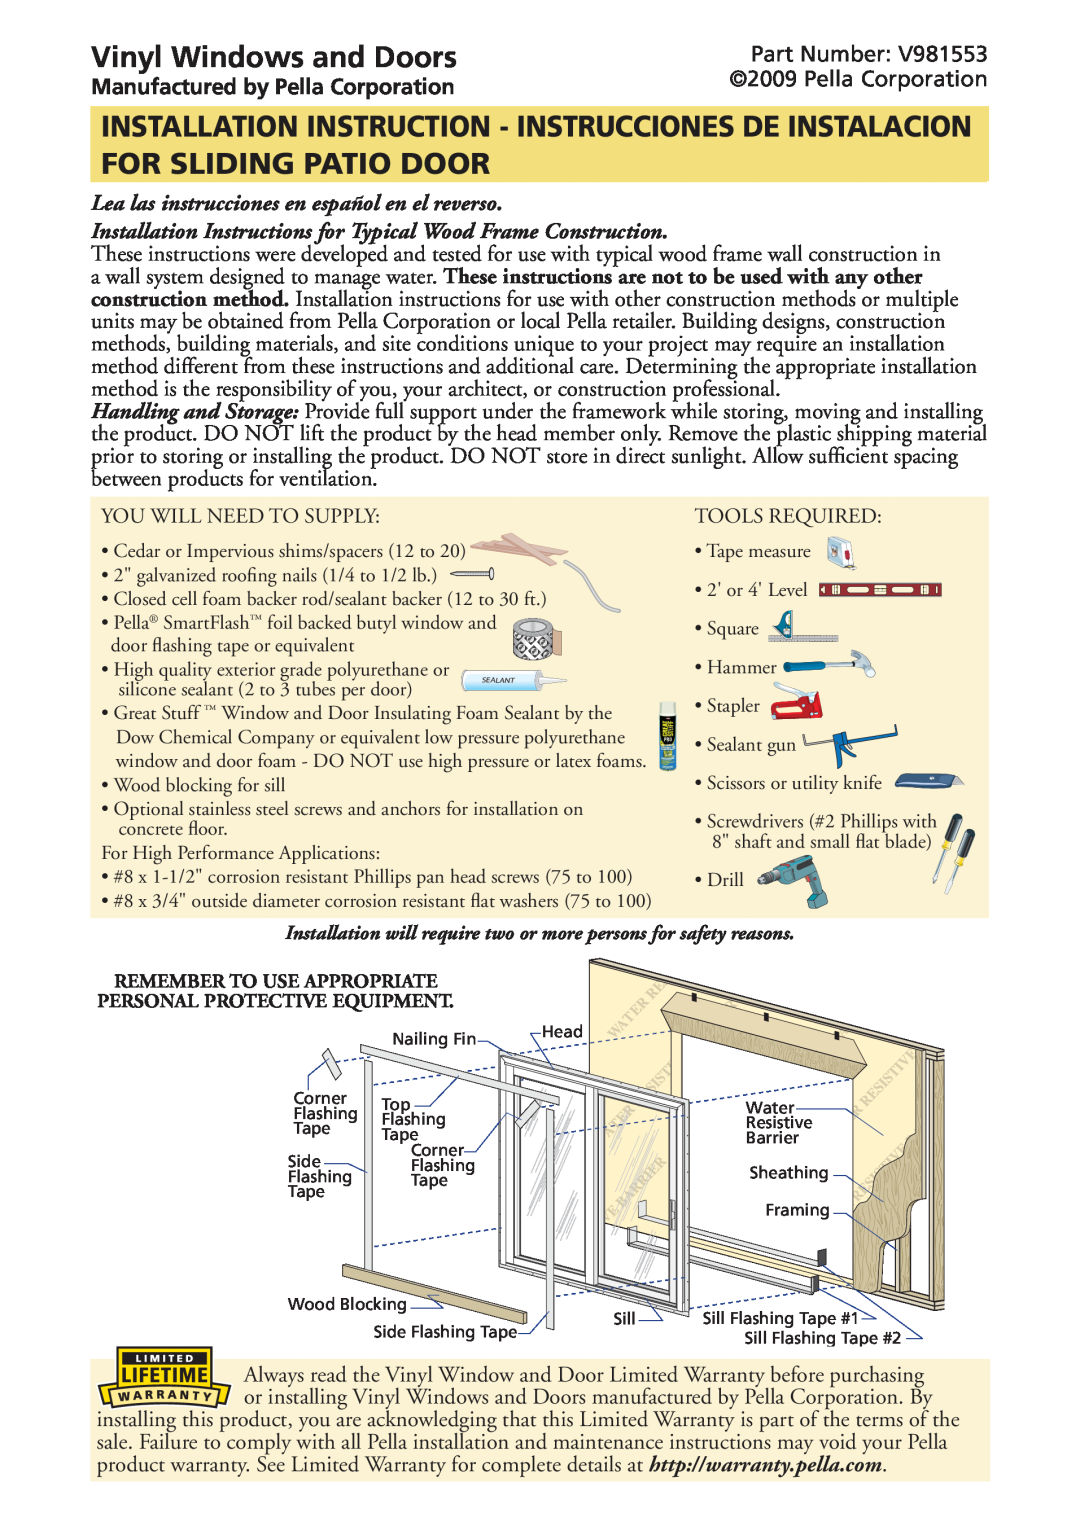 Pella V981553 installation instructions Vinyl Windows and Doors, Part Number, Manufactured by Pella Corporation 